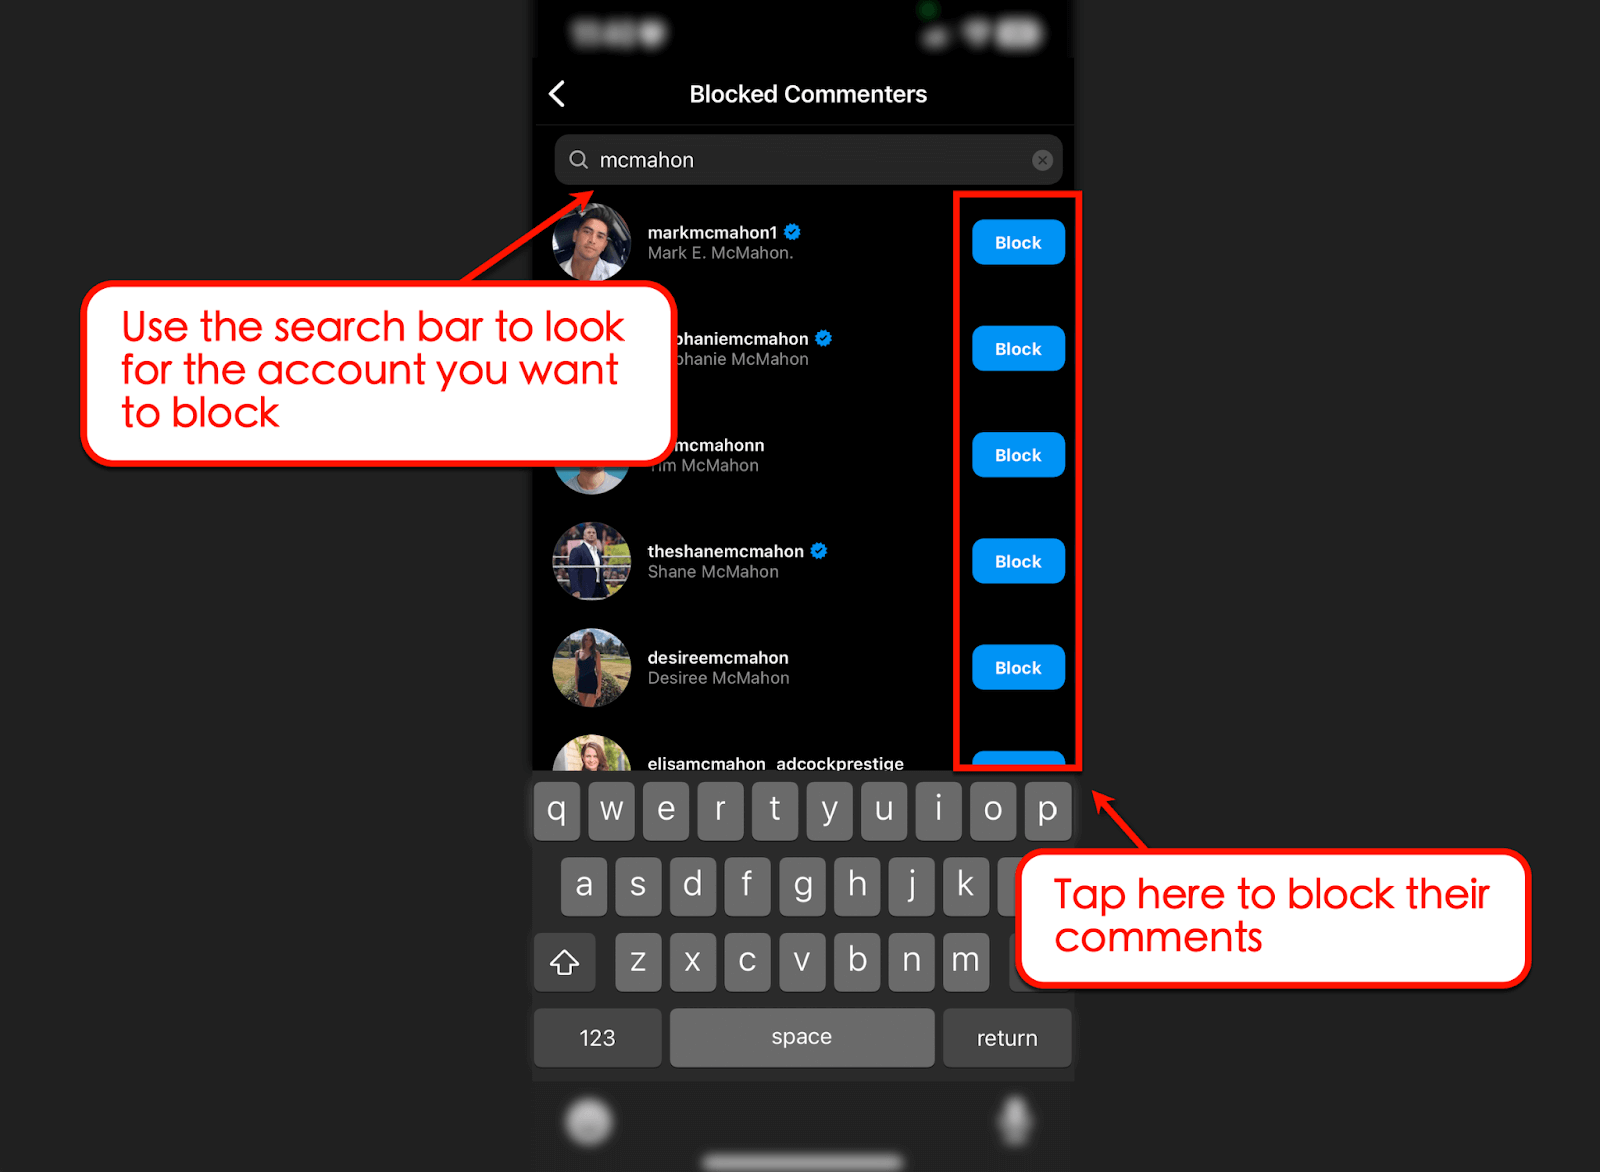 Search for the profile to block